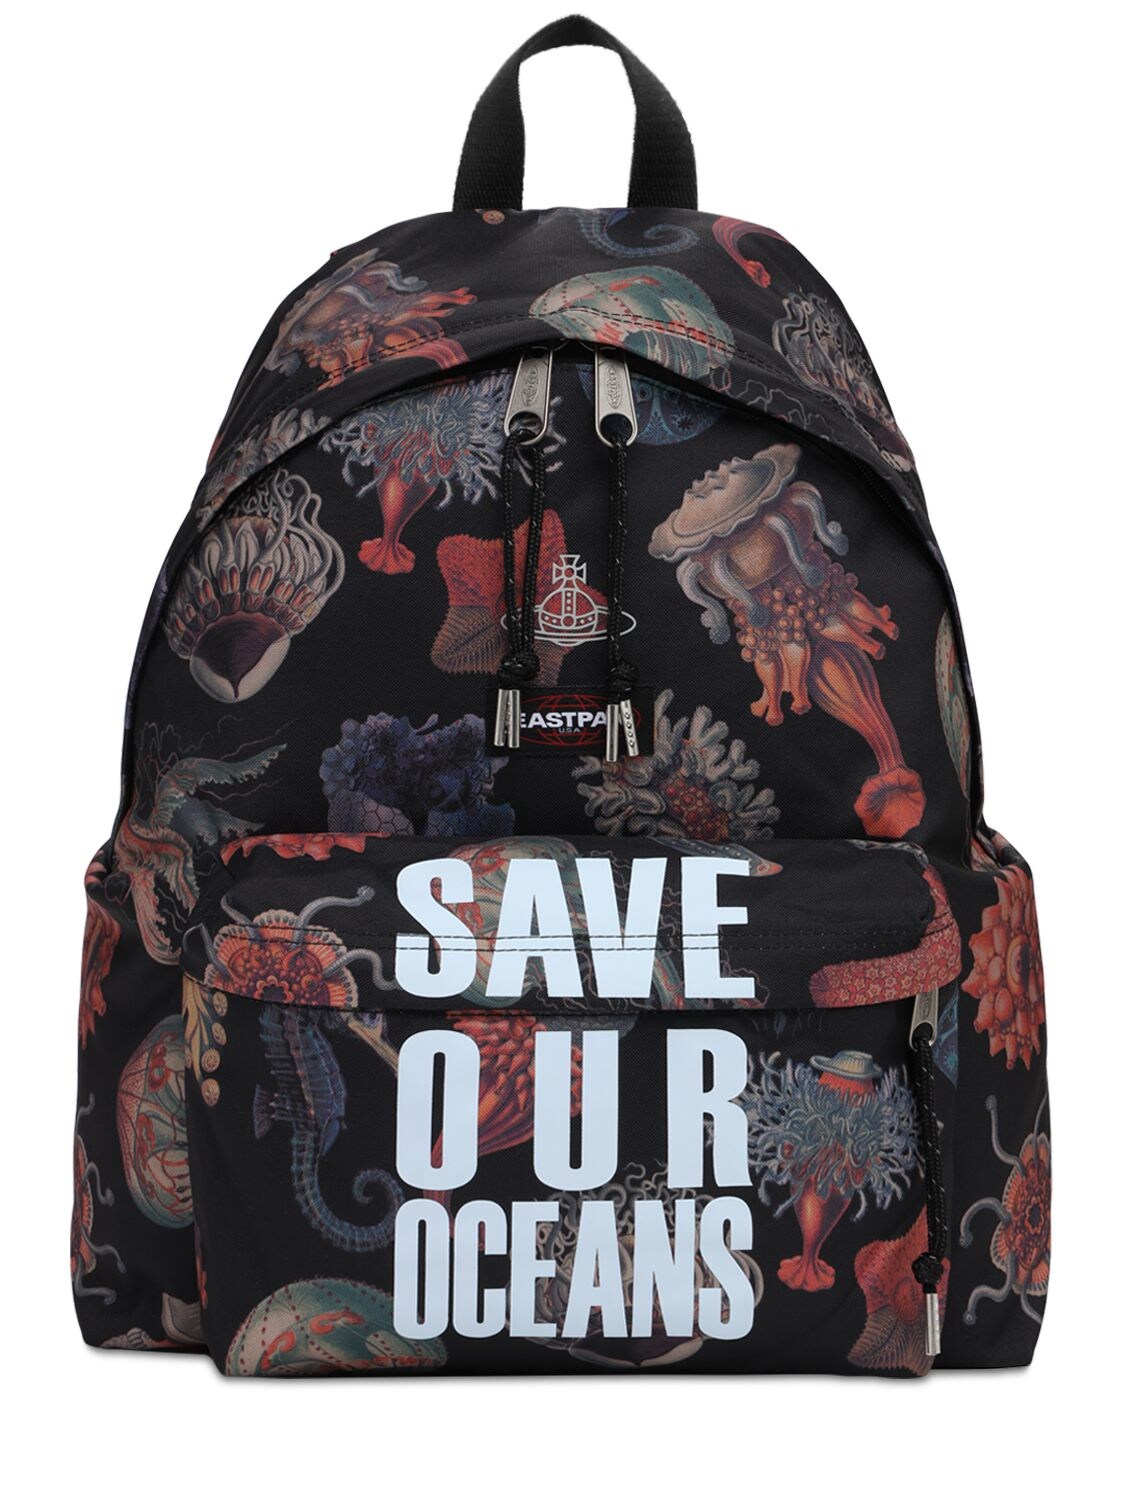 EASTPAK 24L VW PADDED SAVE OUR OCEANS BACKPACK,72IWO5001-QJK20